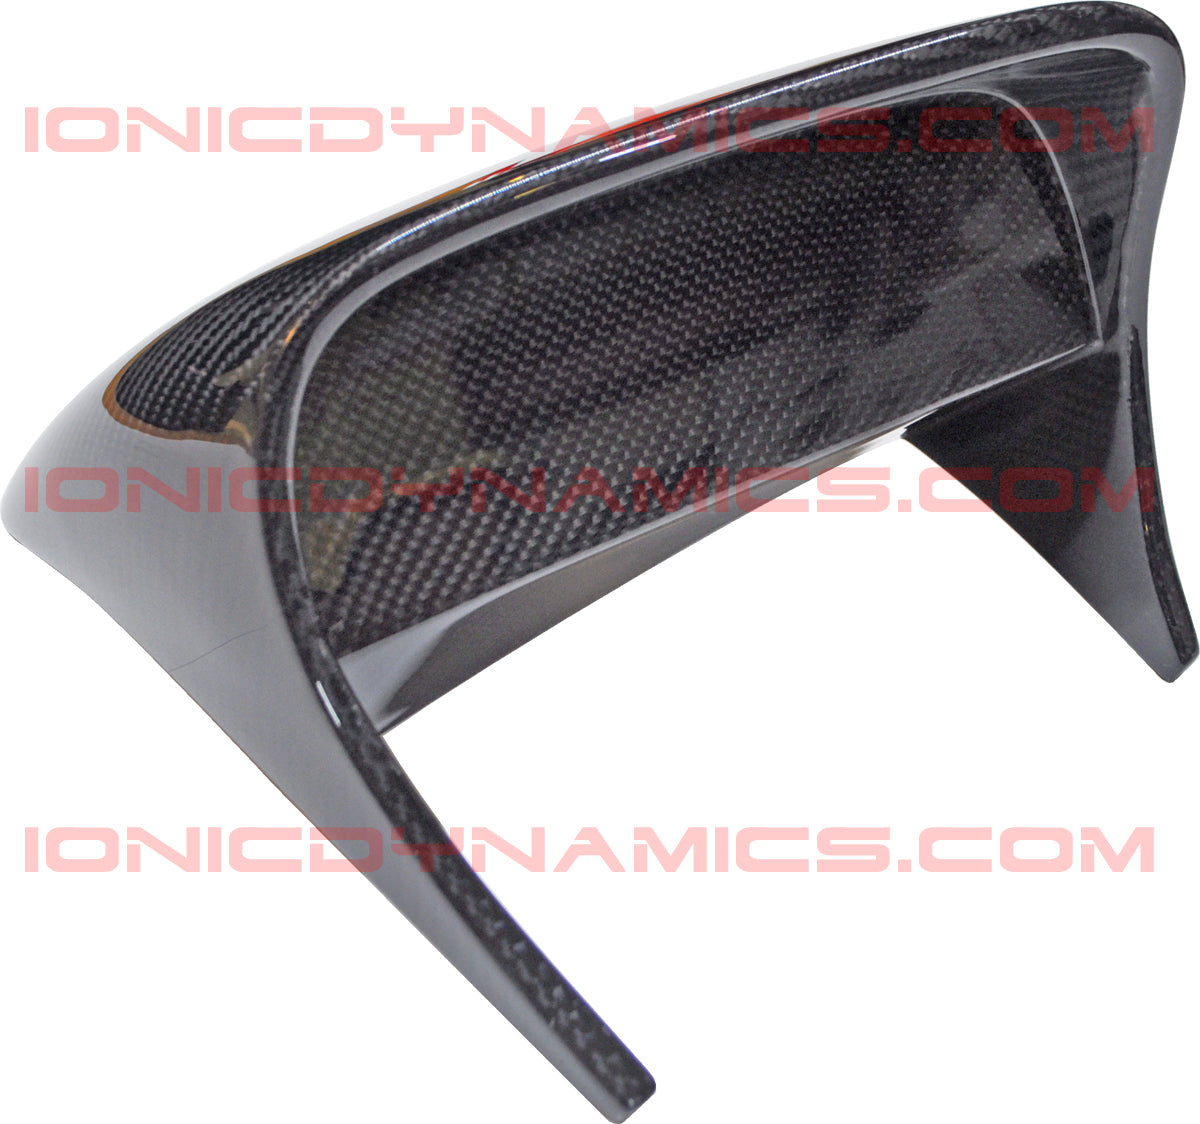 TAX REFUND SALE. Ionic Dynamics 300zx dash pod. Save $15 FG and $30 Painted/CF